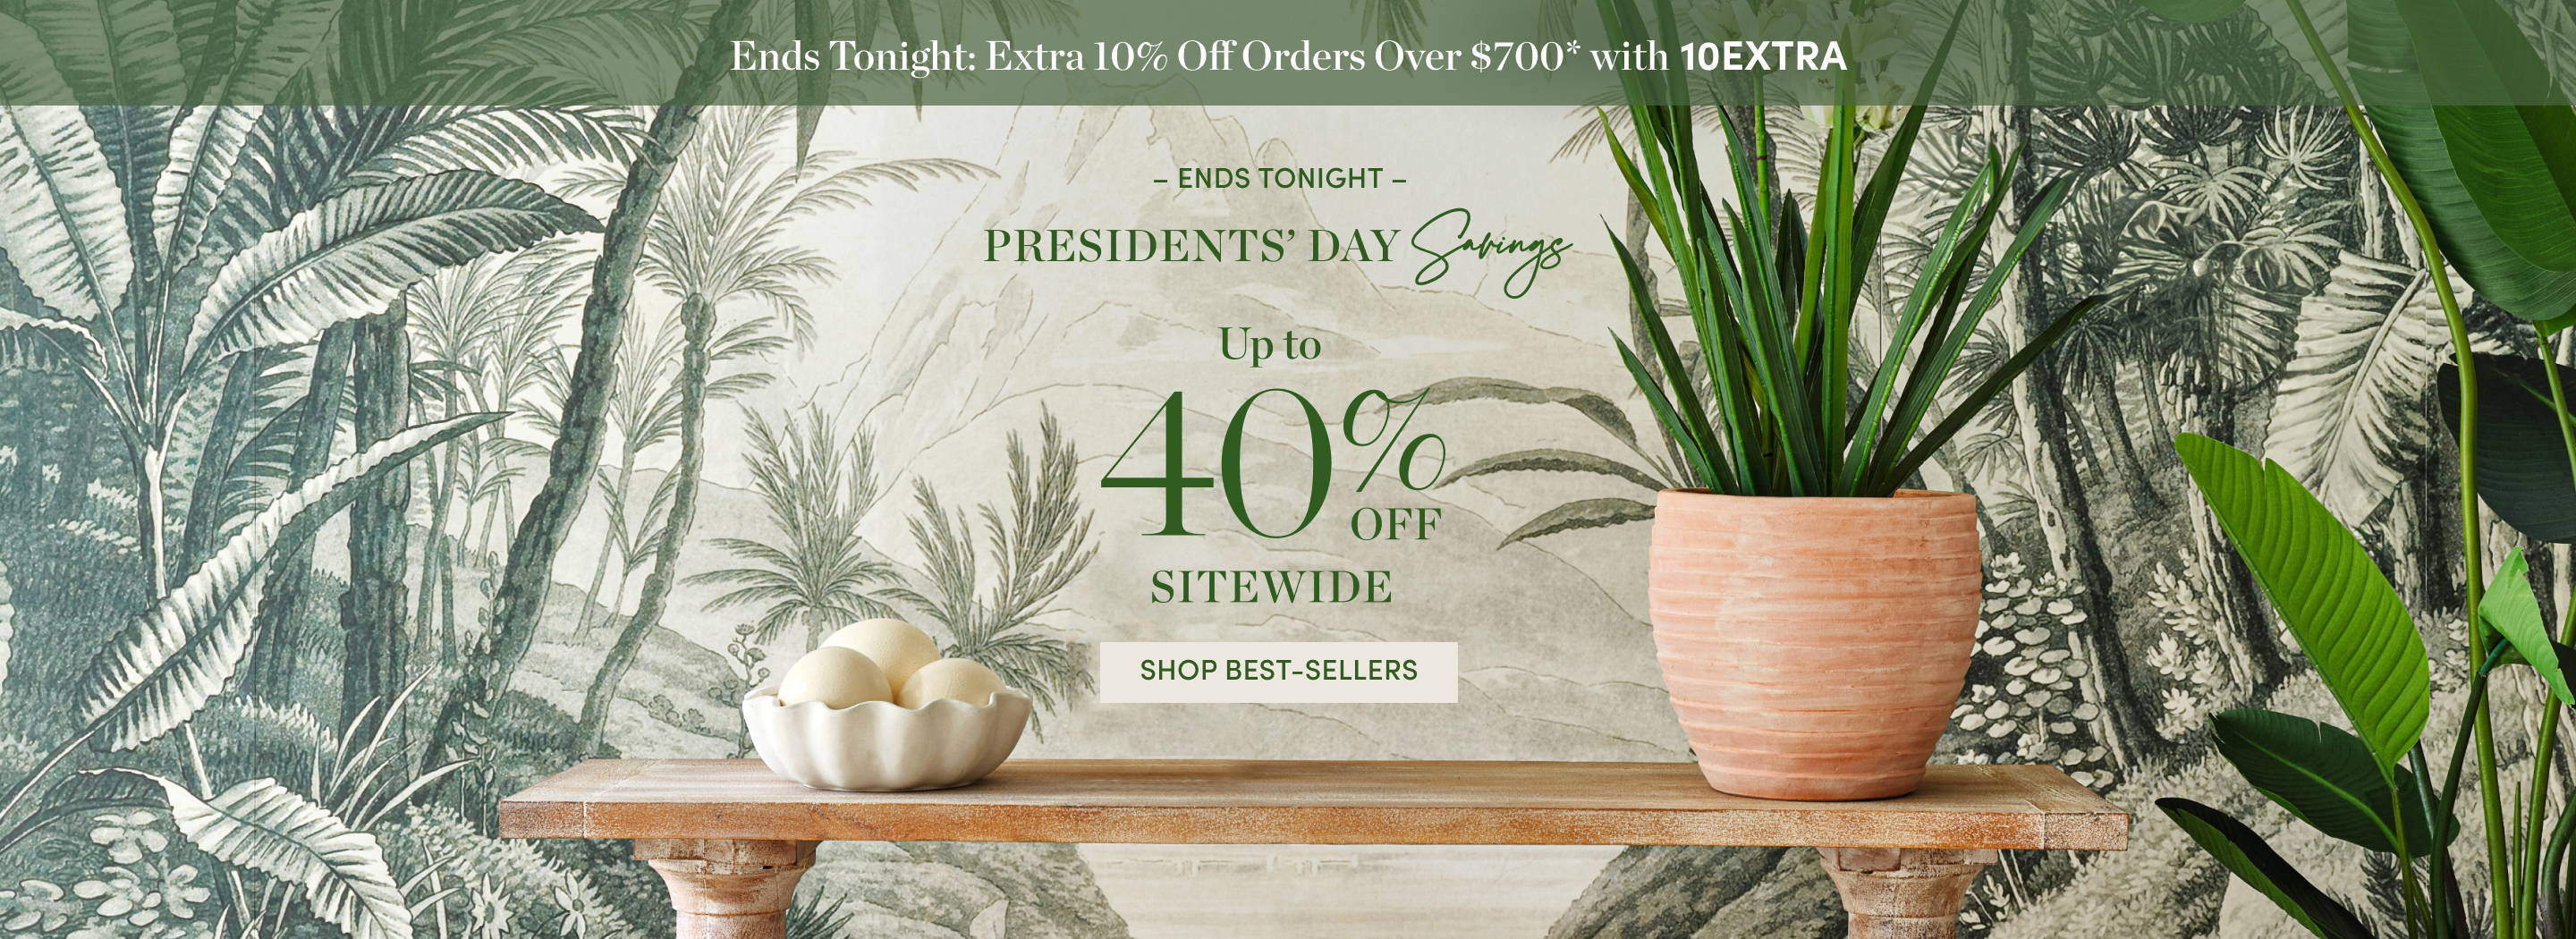 Presidents' Day Savings Up to 40% Off Sitewide Shop Best-Sellers